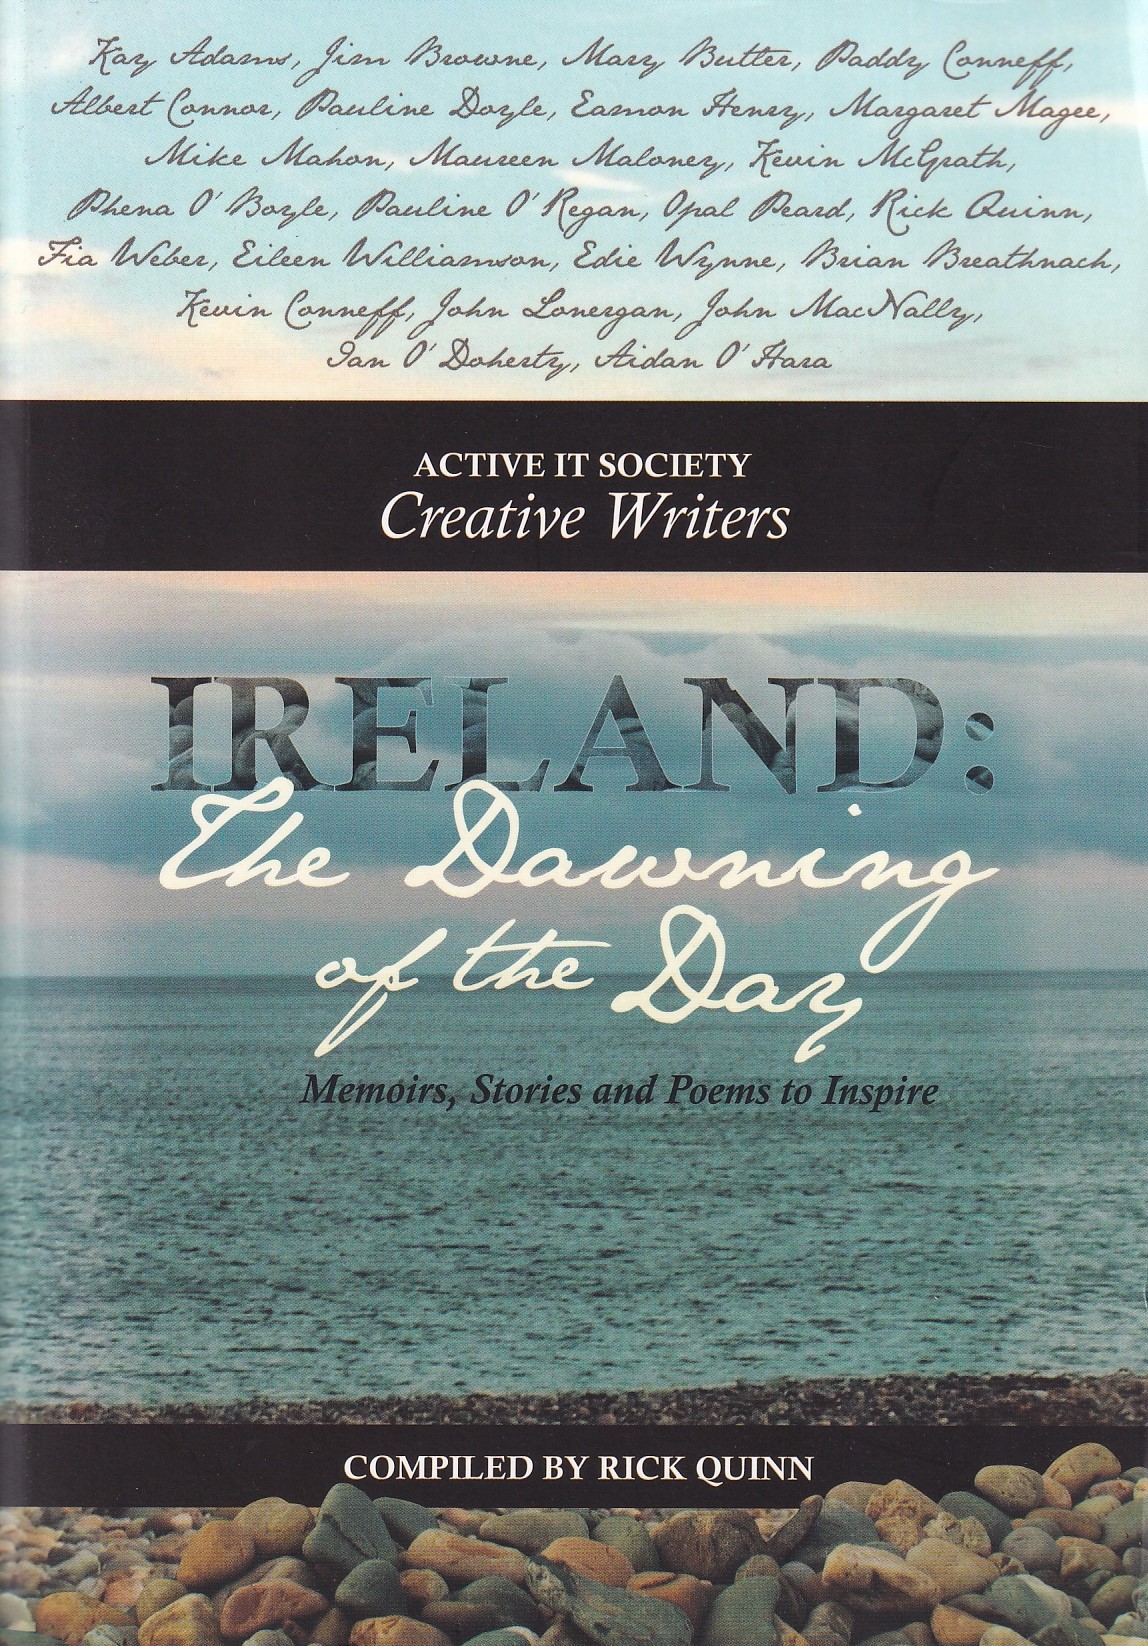 Ireland: The Dawning of the Day: Memoirs, Stories and Poems to Inspire by Active IT Society Creative Writers